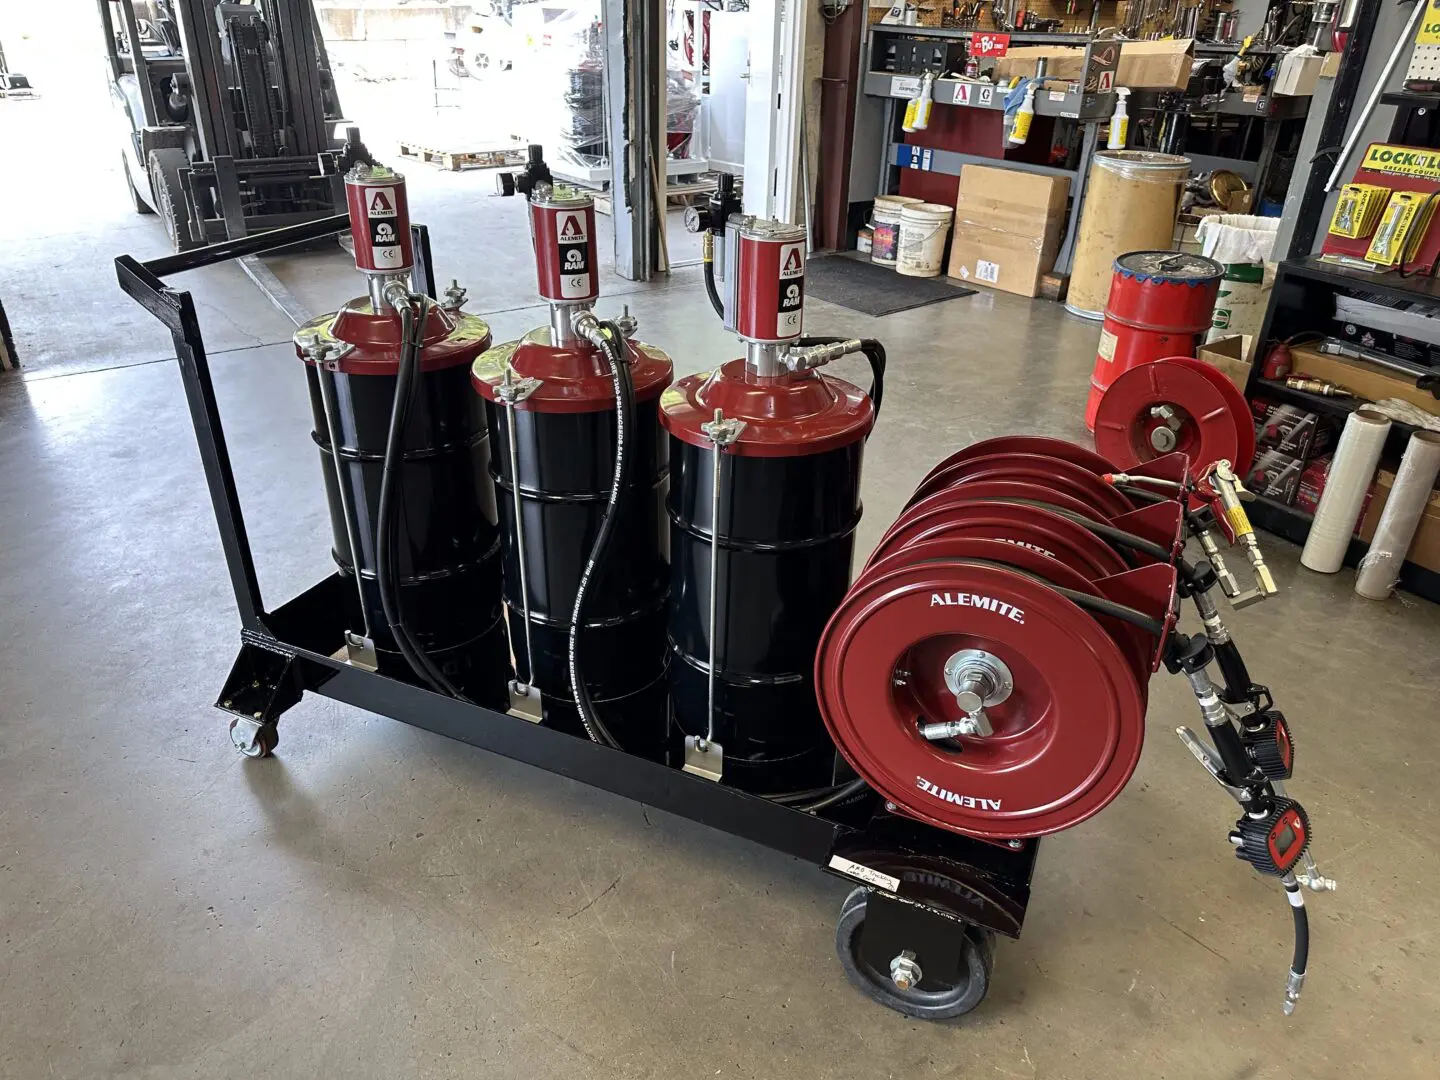 A cart with multiple drums and red valves.